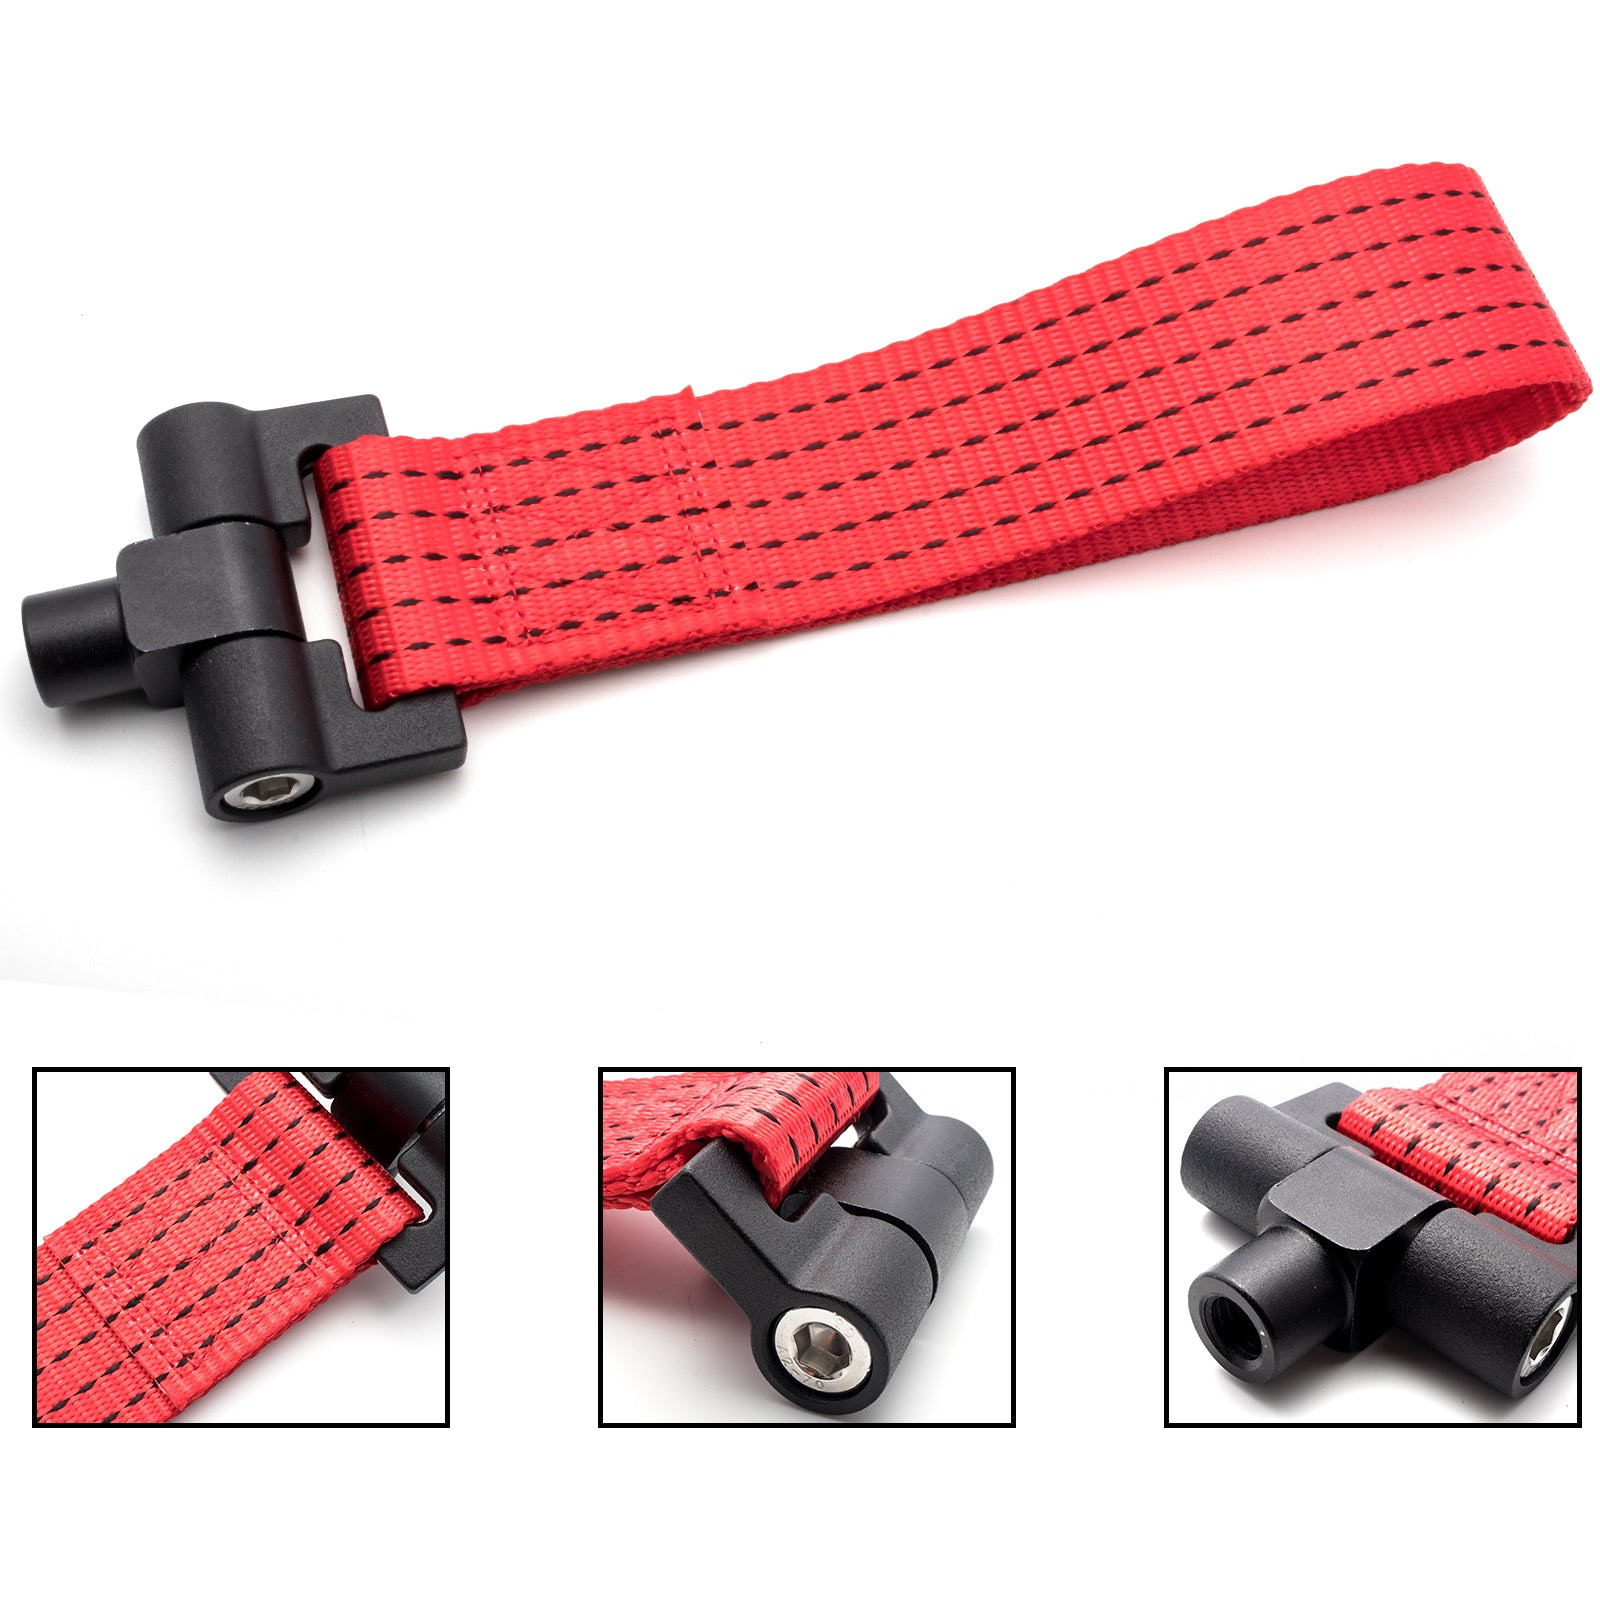 Xotic Tech Red JDM Style Tow Hole Adapter with Towing Strap for BMW 1 3 5 6  Series X5 X6, Fit Mini Cooper 